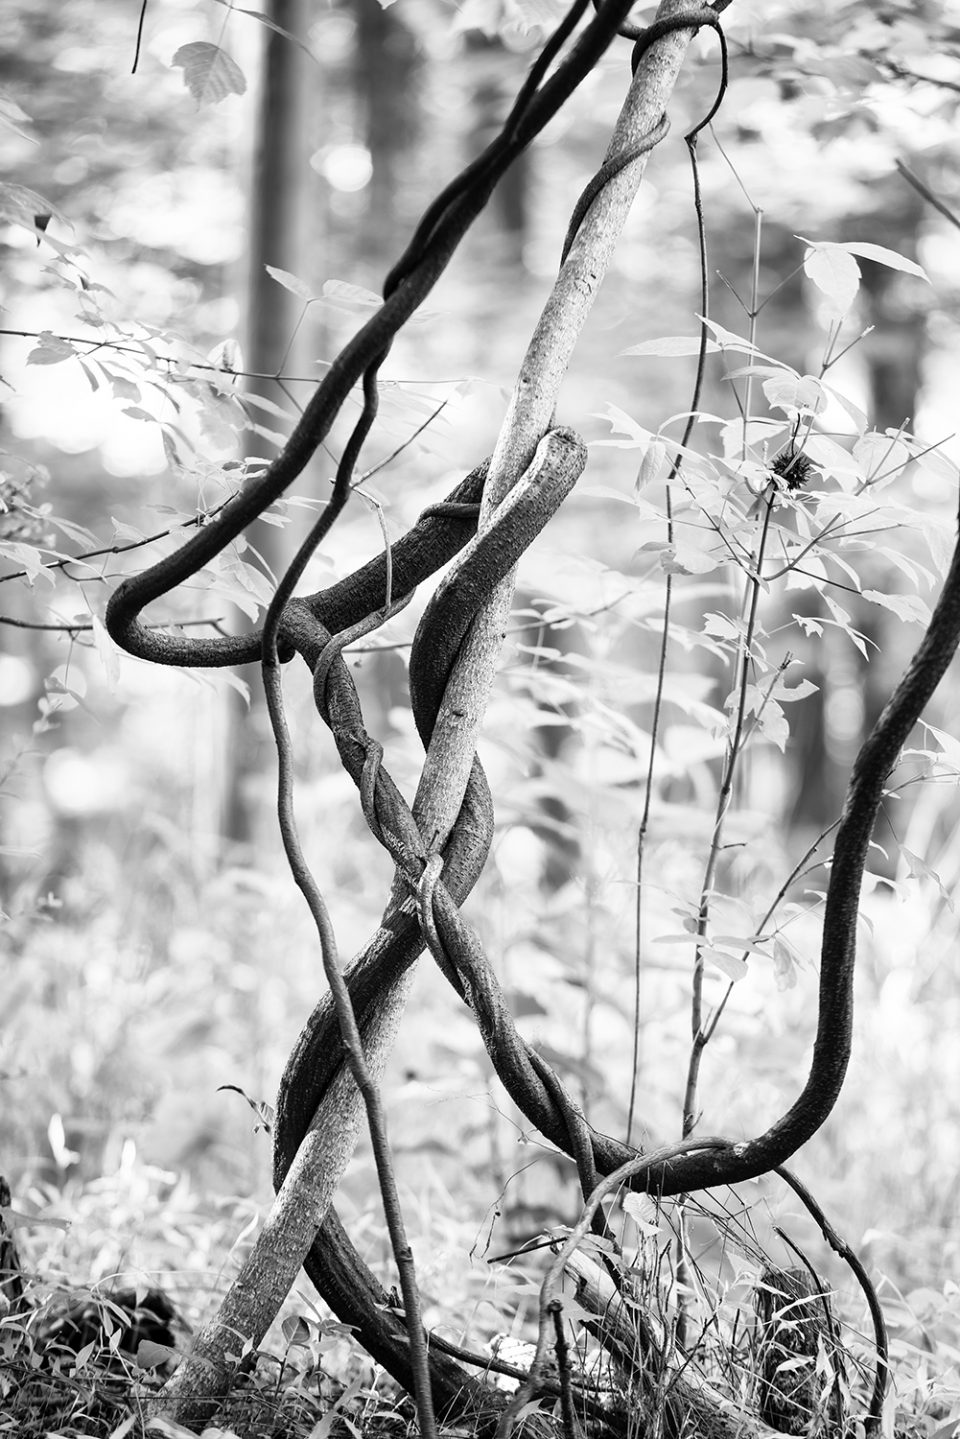 Knotted Vines, black and white photograph by Keith Dotson.